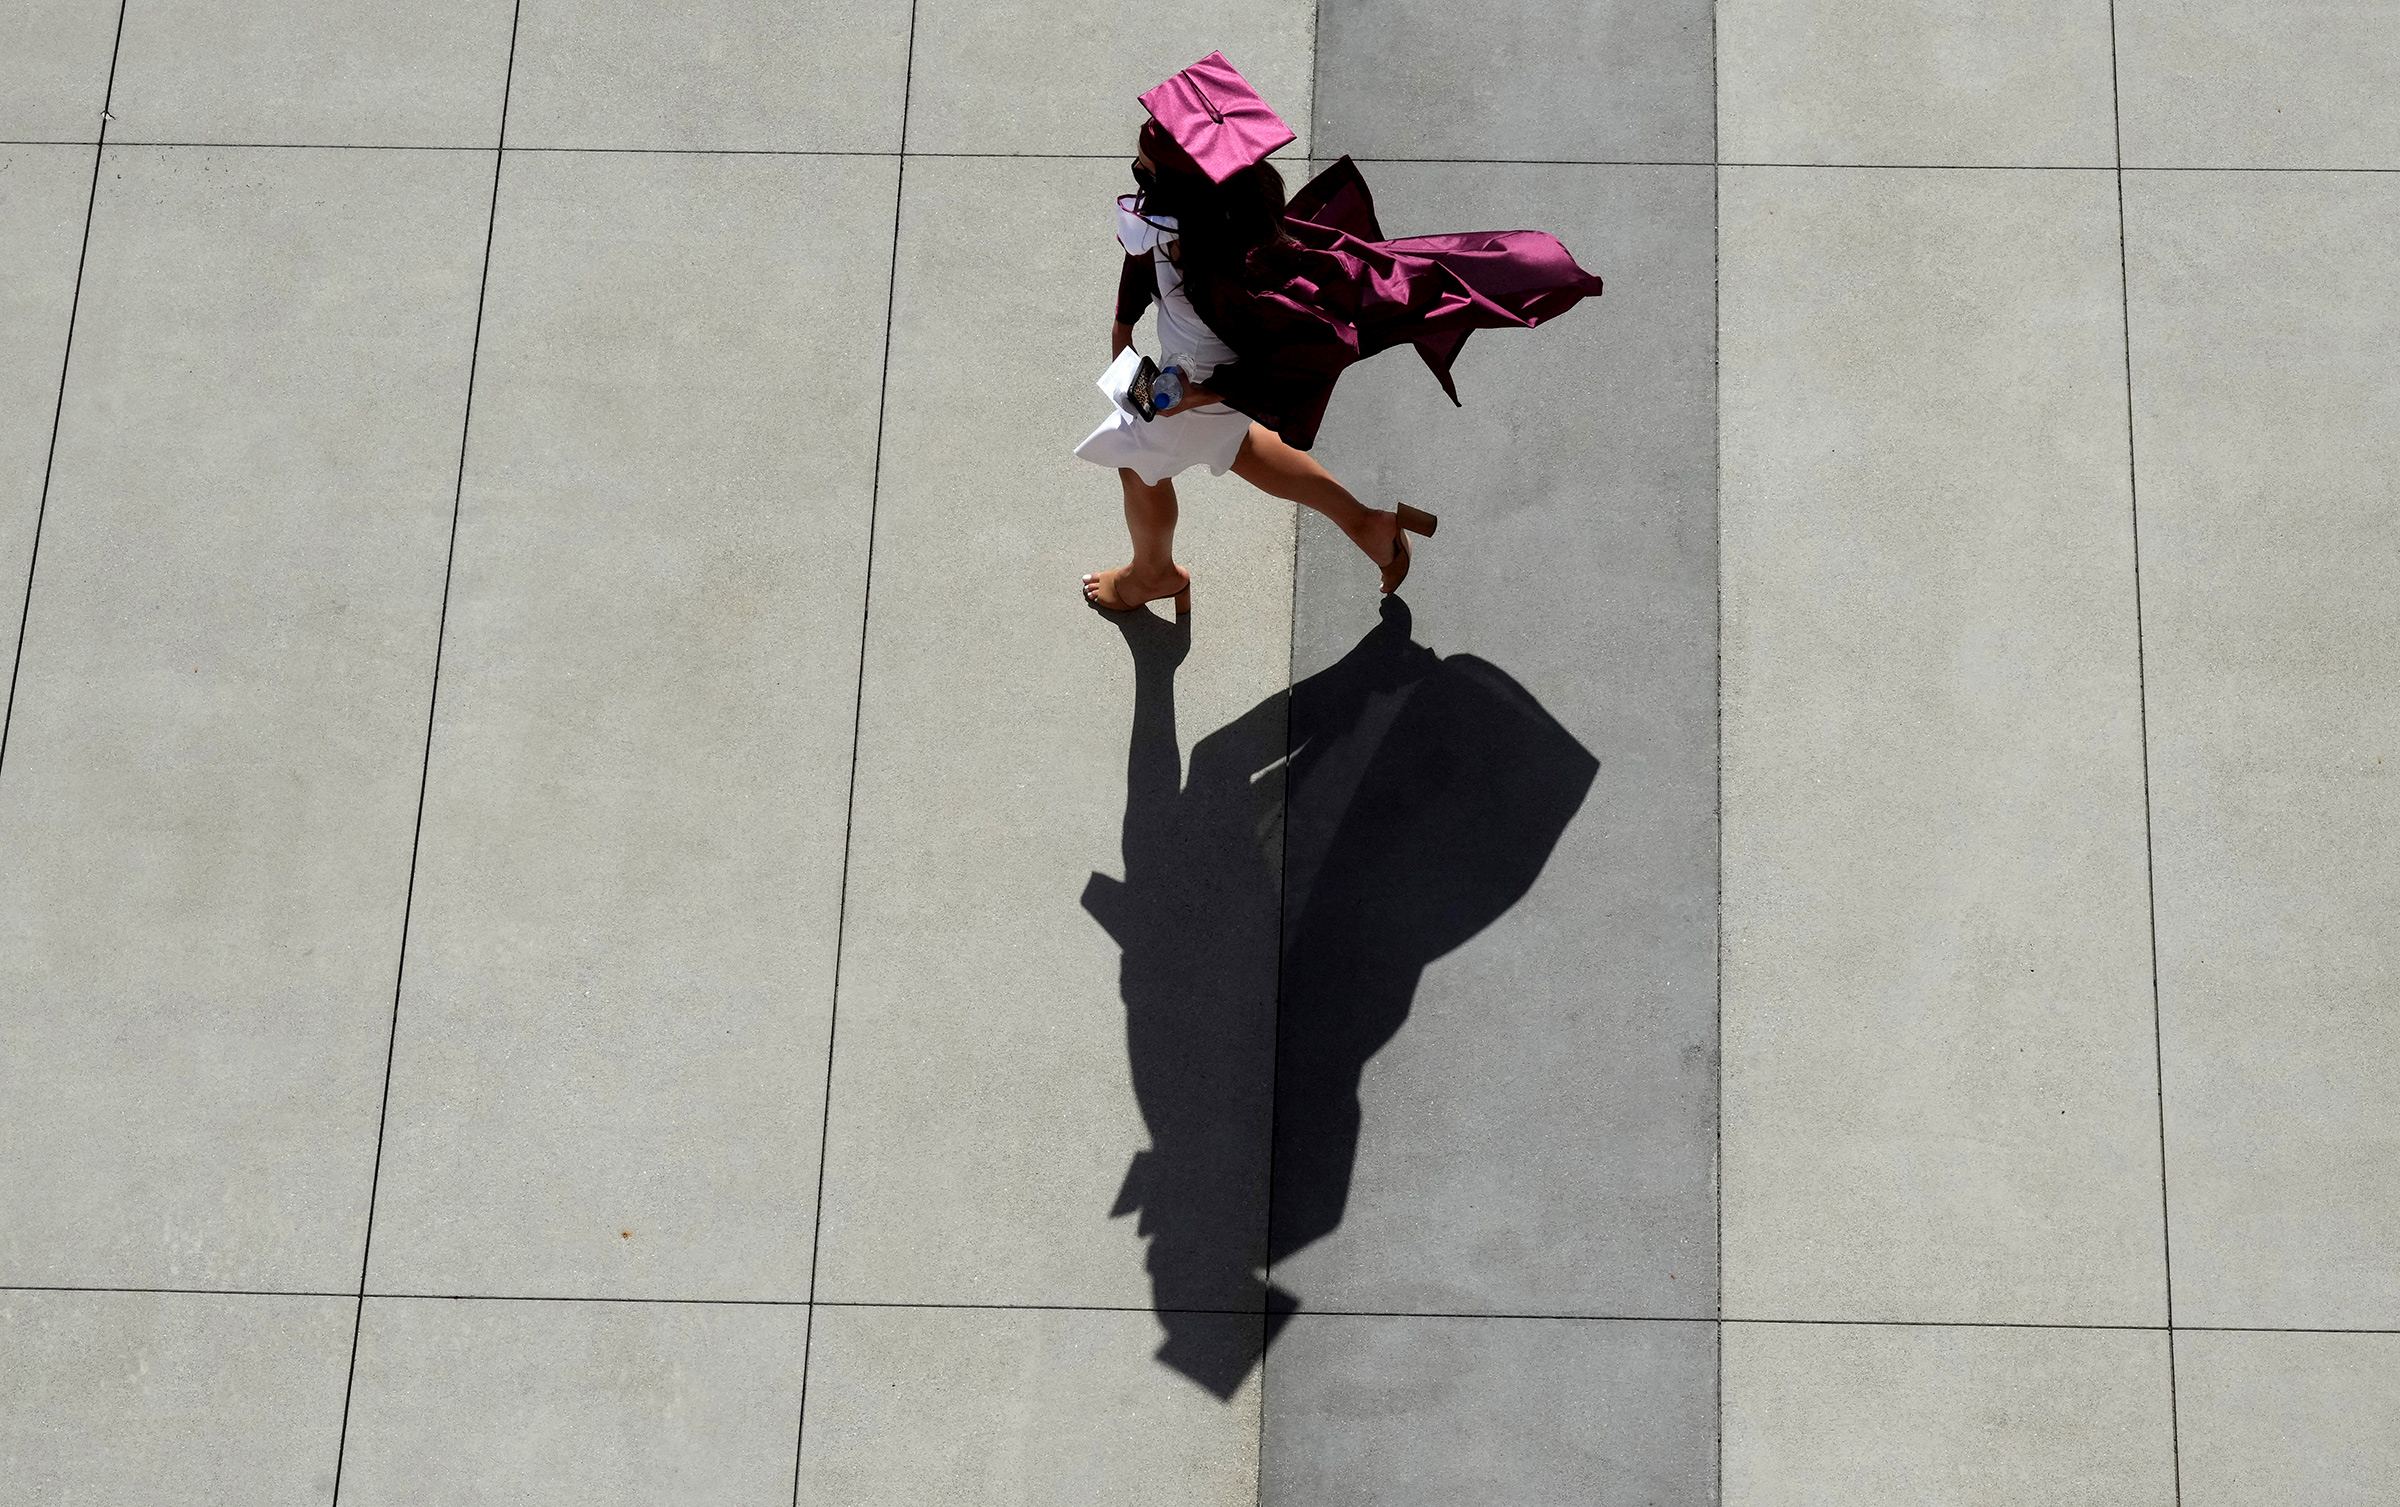 A graduate makes their way to the staging area during the 2021 Mt. Sac graduation in Walnut, Calif. on June 11, 2021. (Keith Birmingham—The Orange County Register/AP)